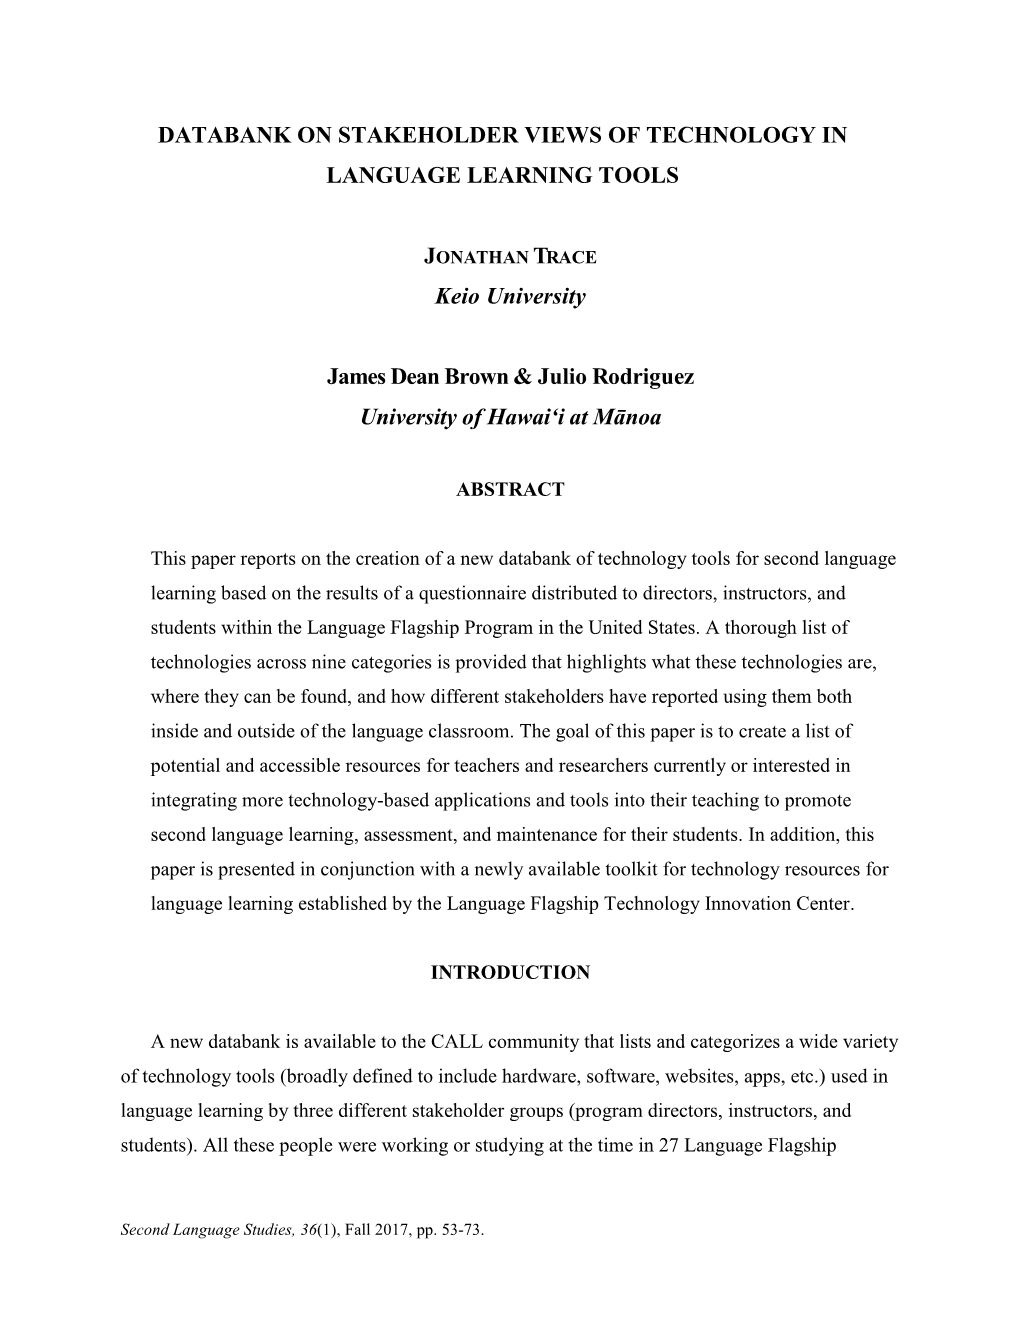 Databank on Stakeholder Views of Technology in Language Learning Tools